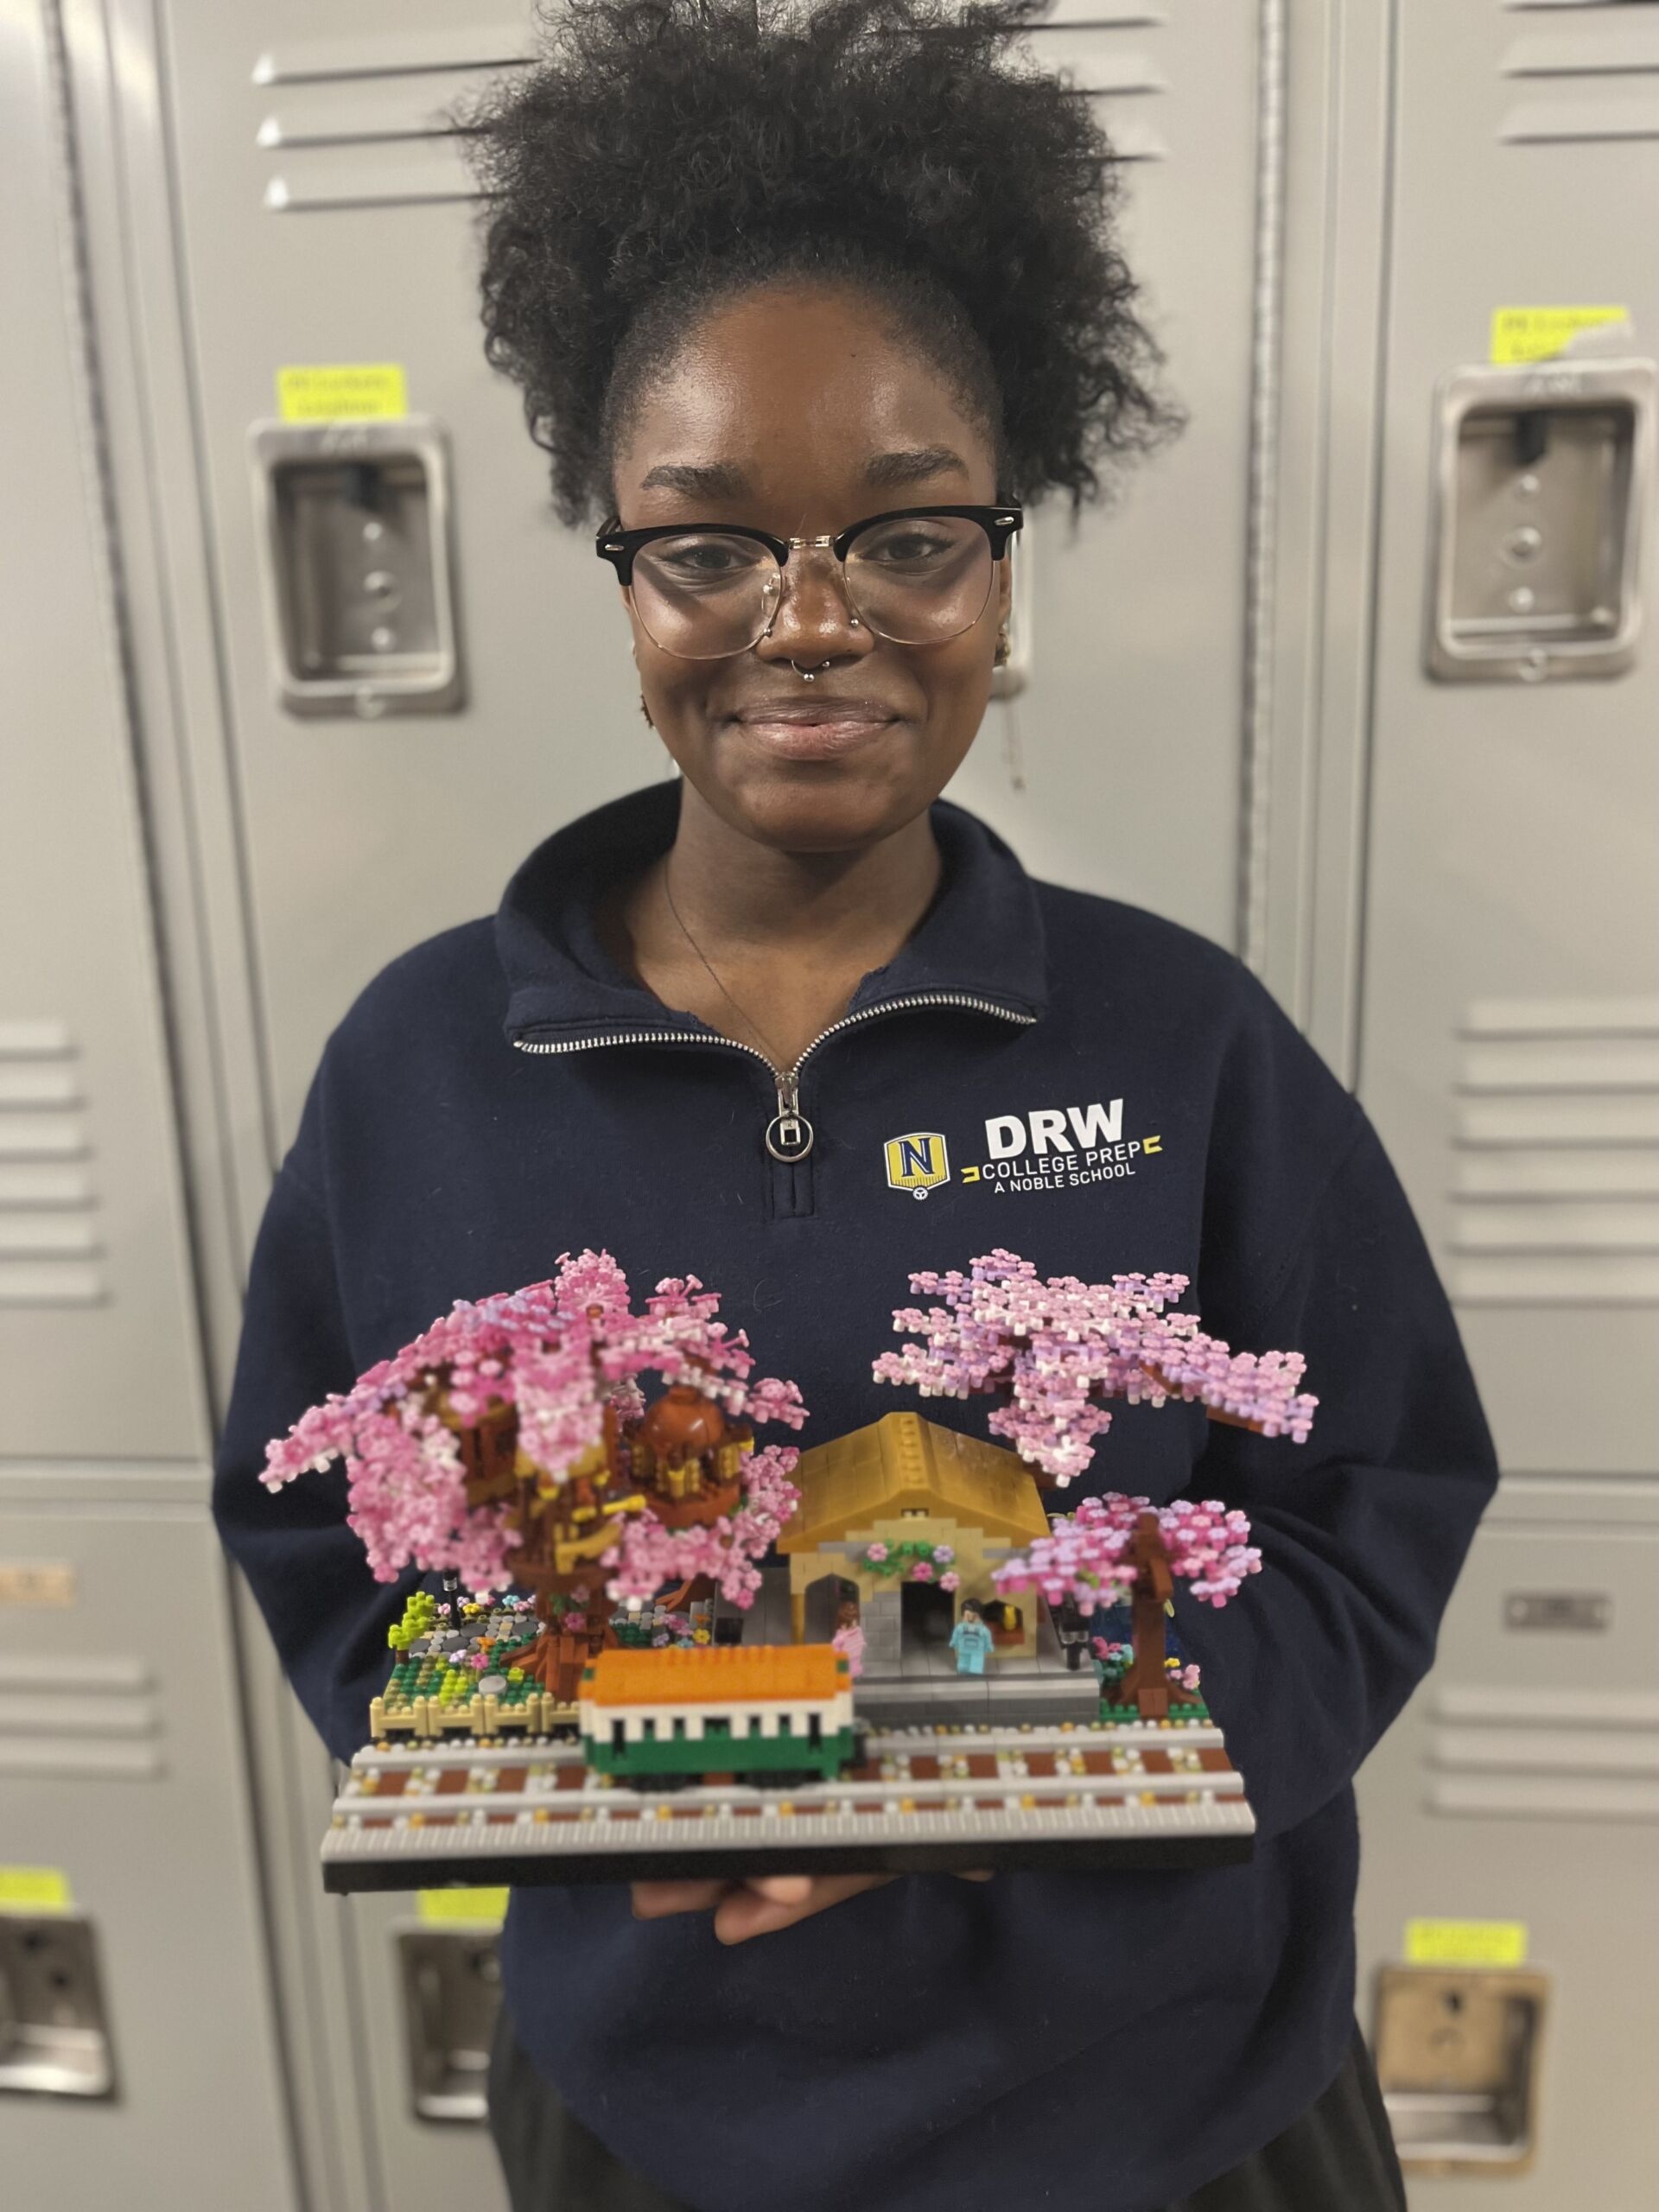 DRW student holding a house and surrounding front yard with pink trees, all made of Legos. the student is wearing a navy sweater standing in front of lockers